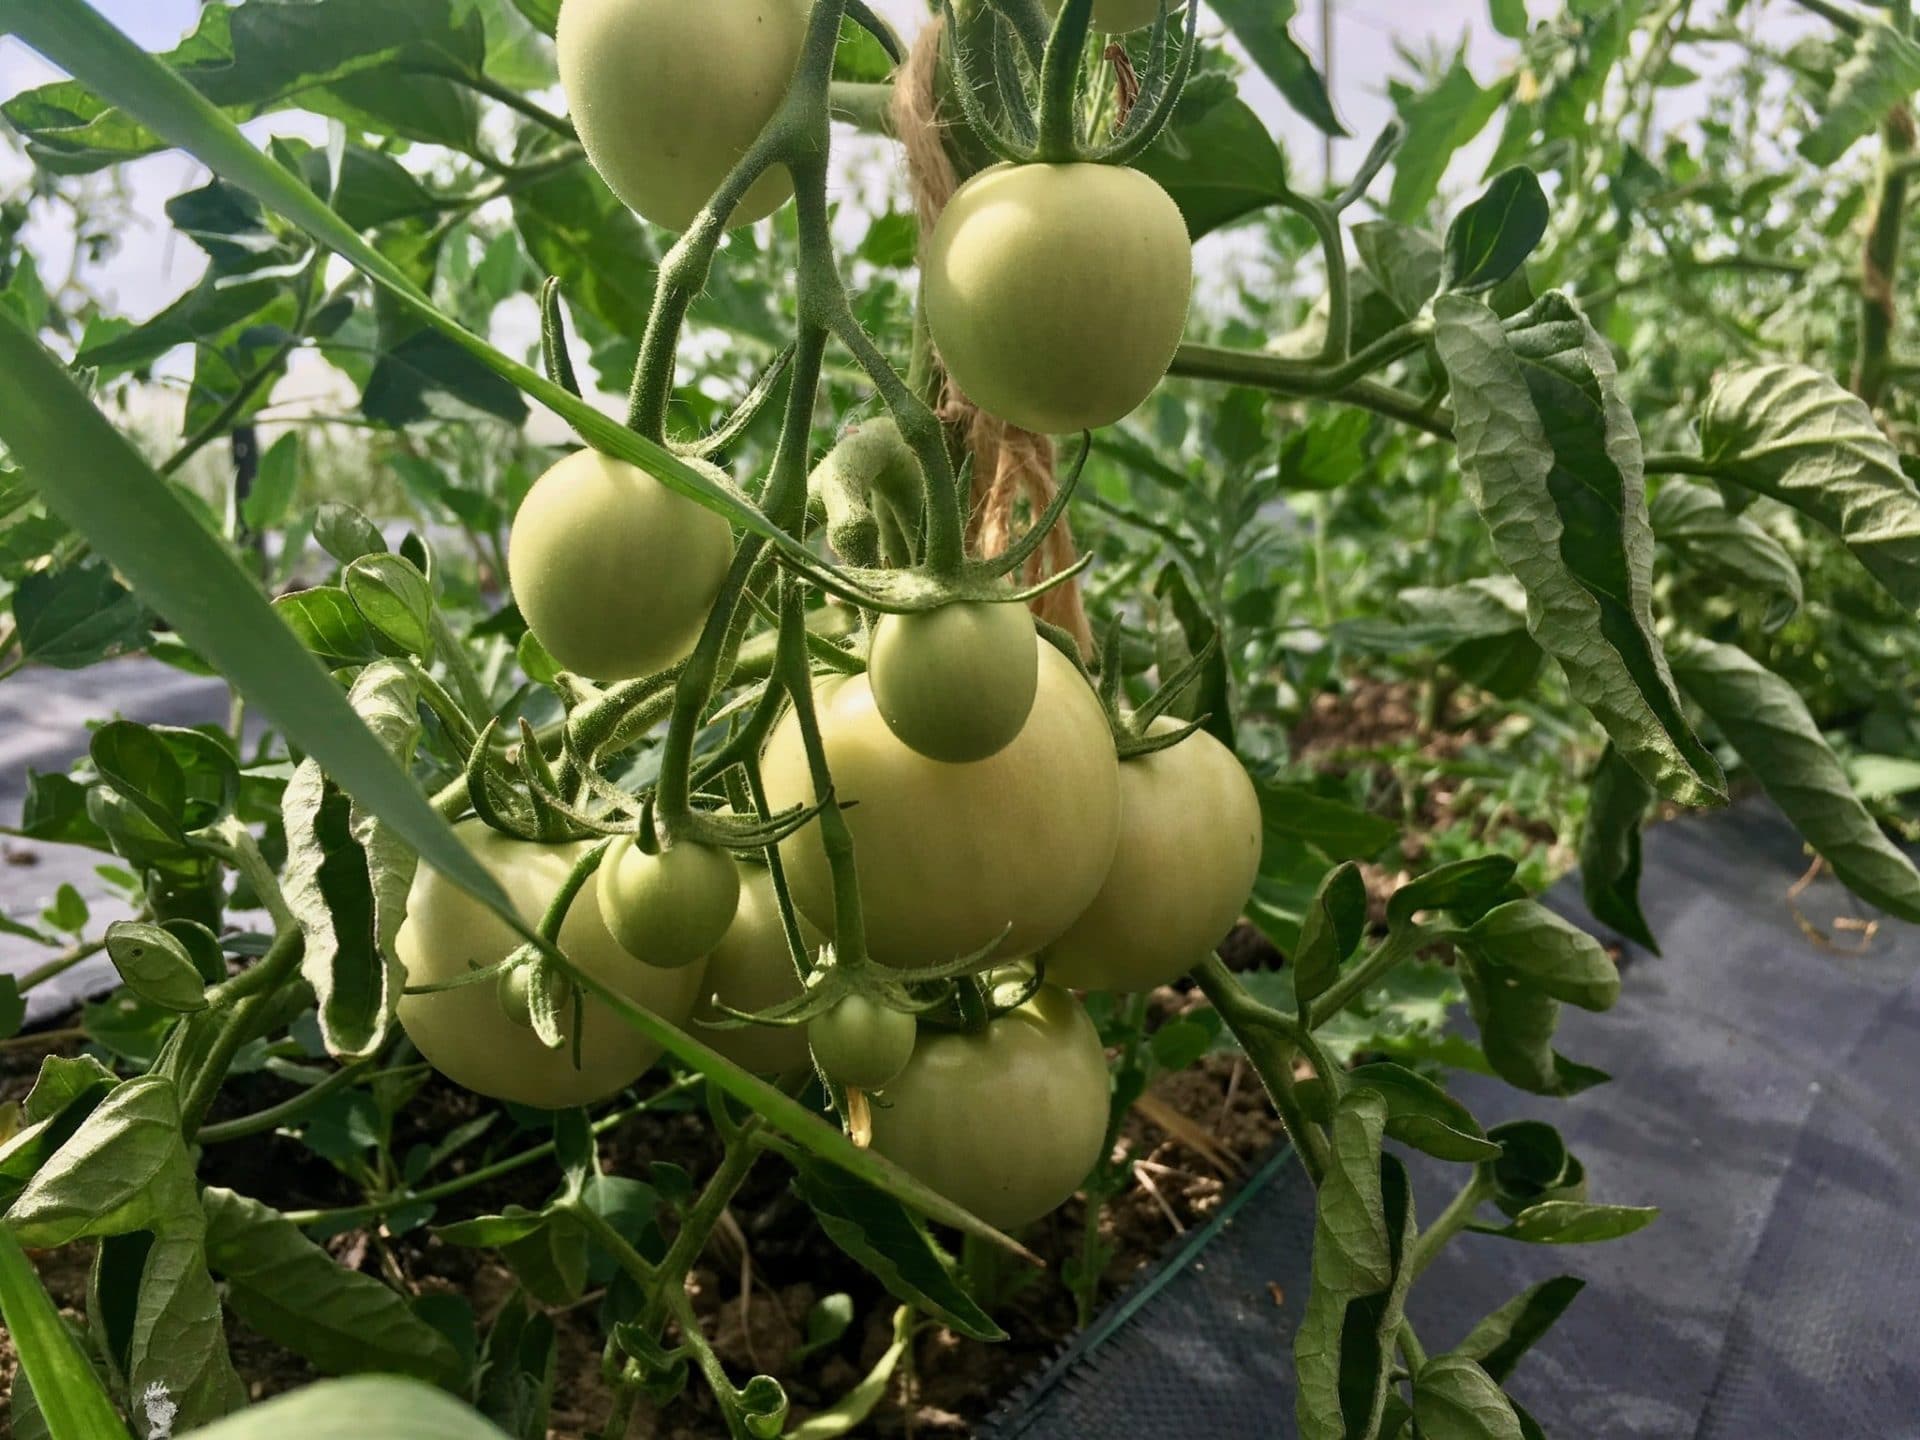 Tomaters